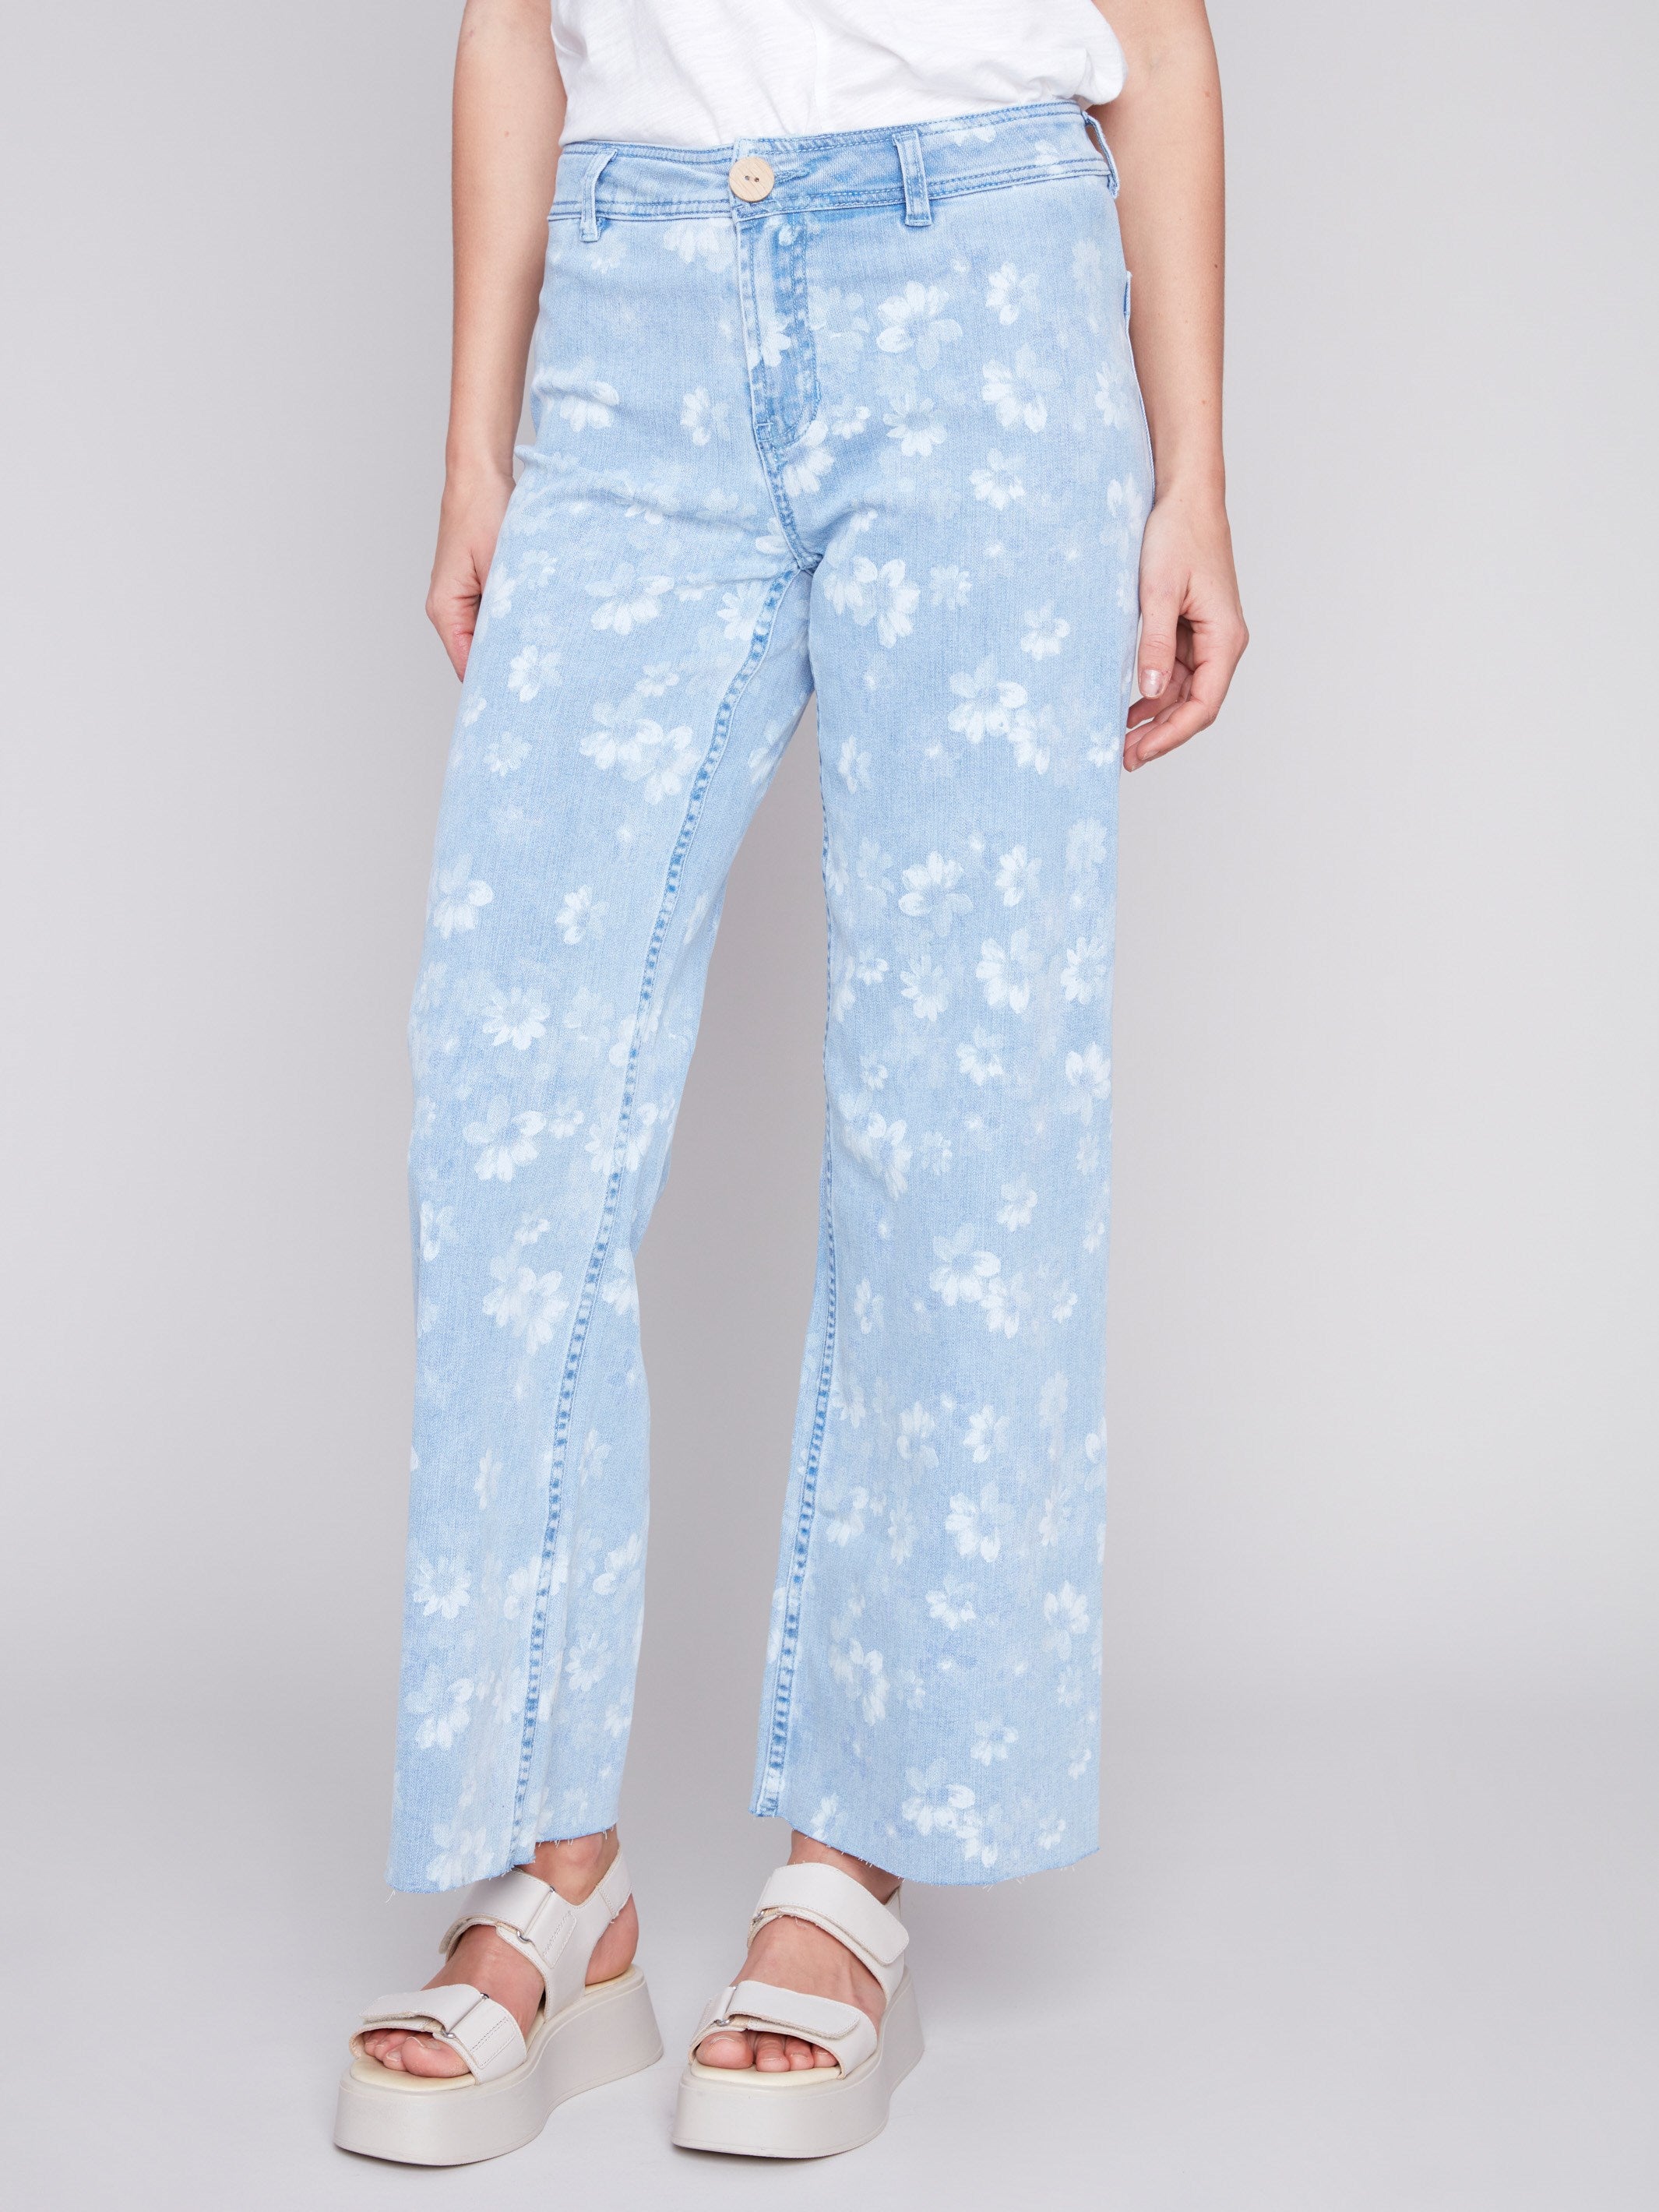 Printed Wide Leg Pants with Raw Hem - Daisy Blue - Charlie B Collection Canada - Image 2